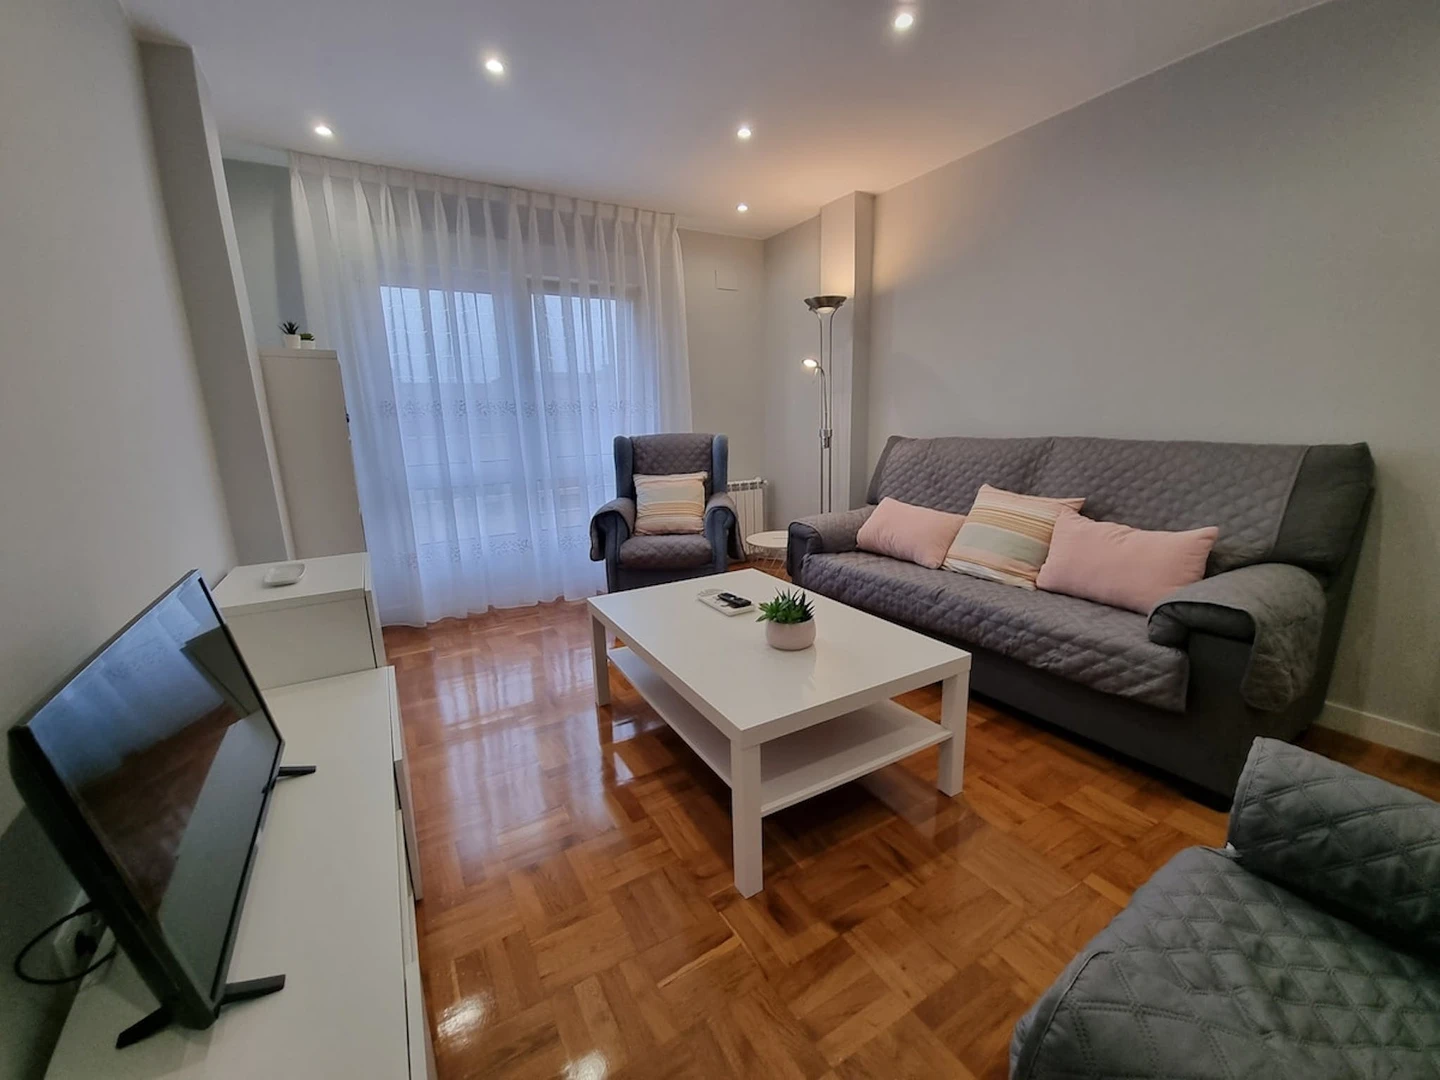 Modern and bright flat in Gijón